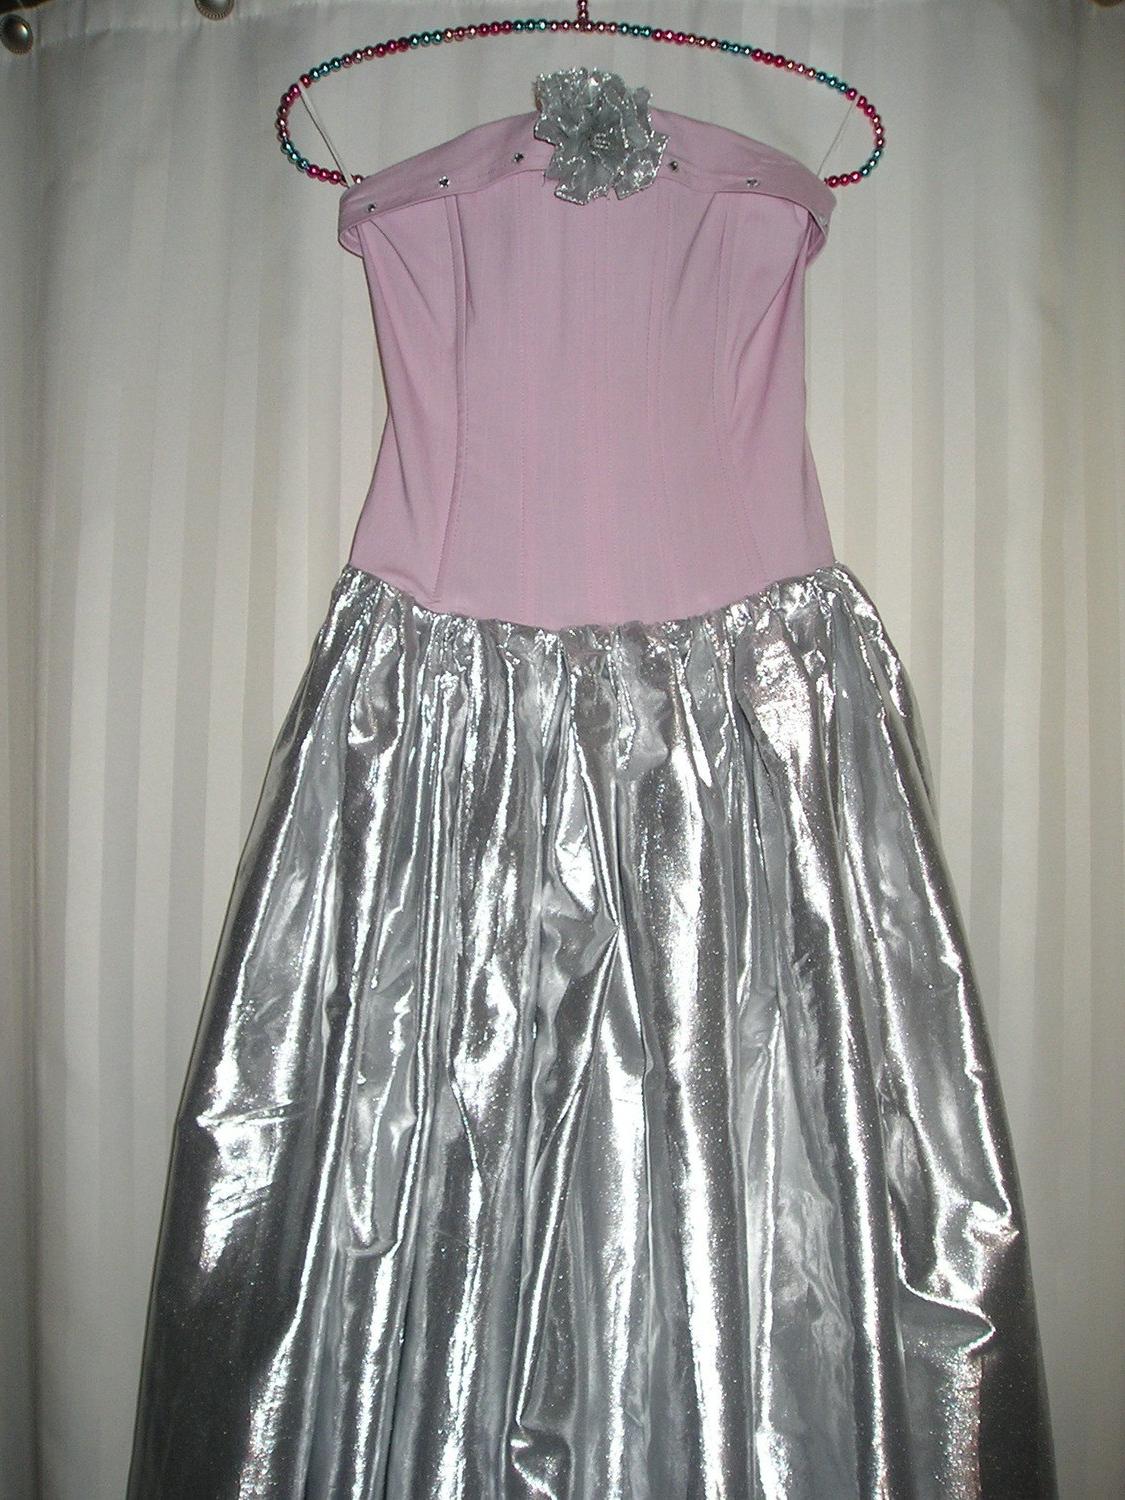 Pink and silver dress, corset,